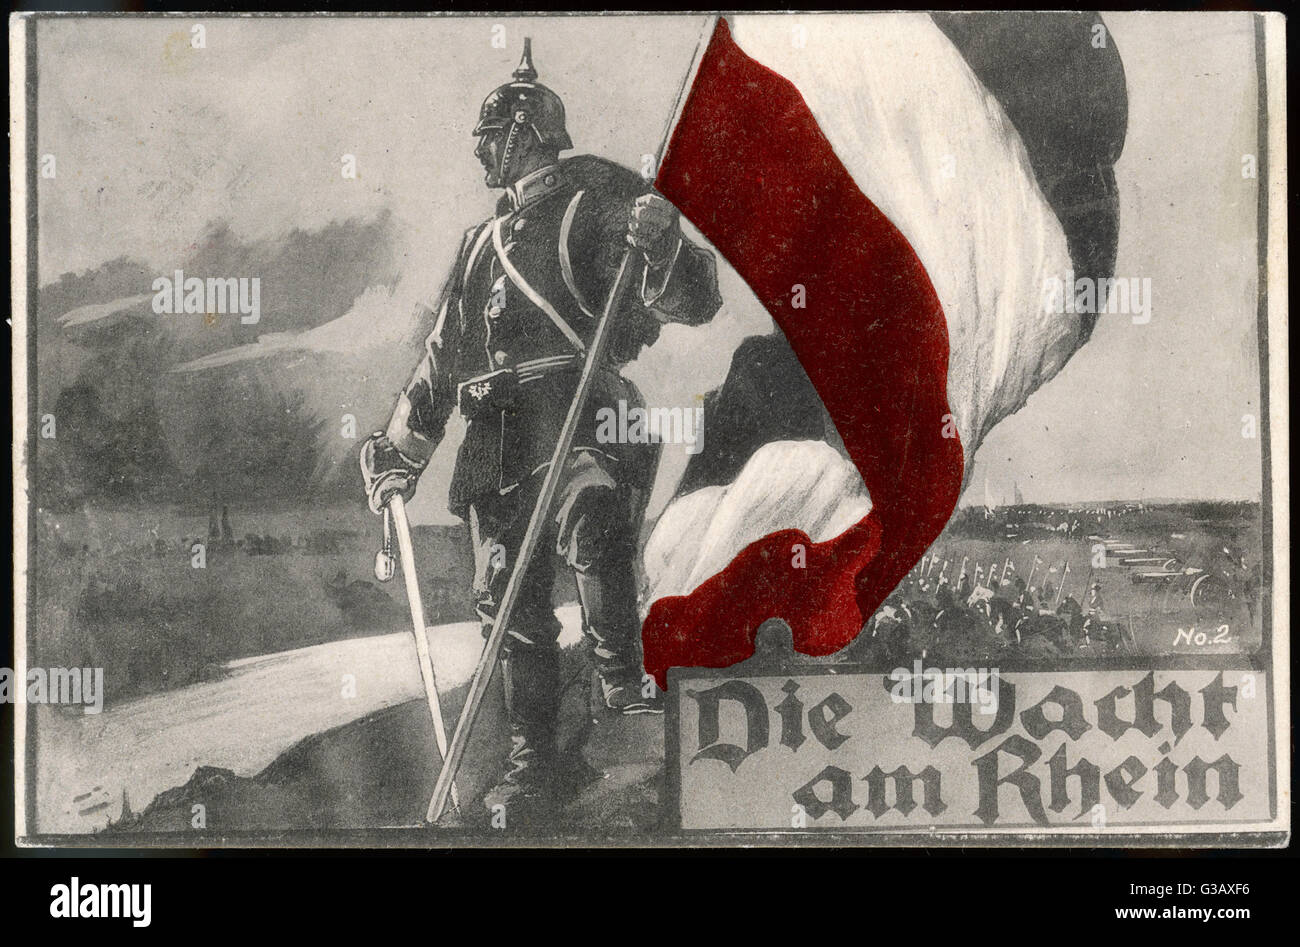 ANTI-FRENCH  The watch on the Rhine -  Germany protects her borders  against the belligerent,  warlike, aggressive French     Date: 1914 Stock Photo